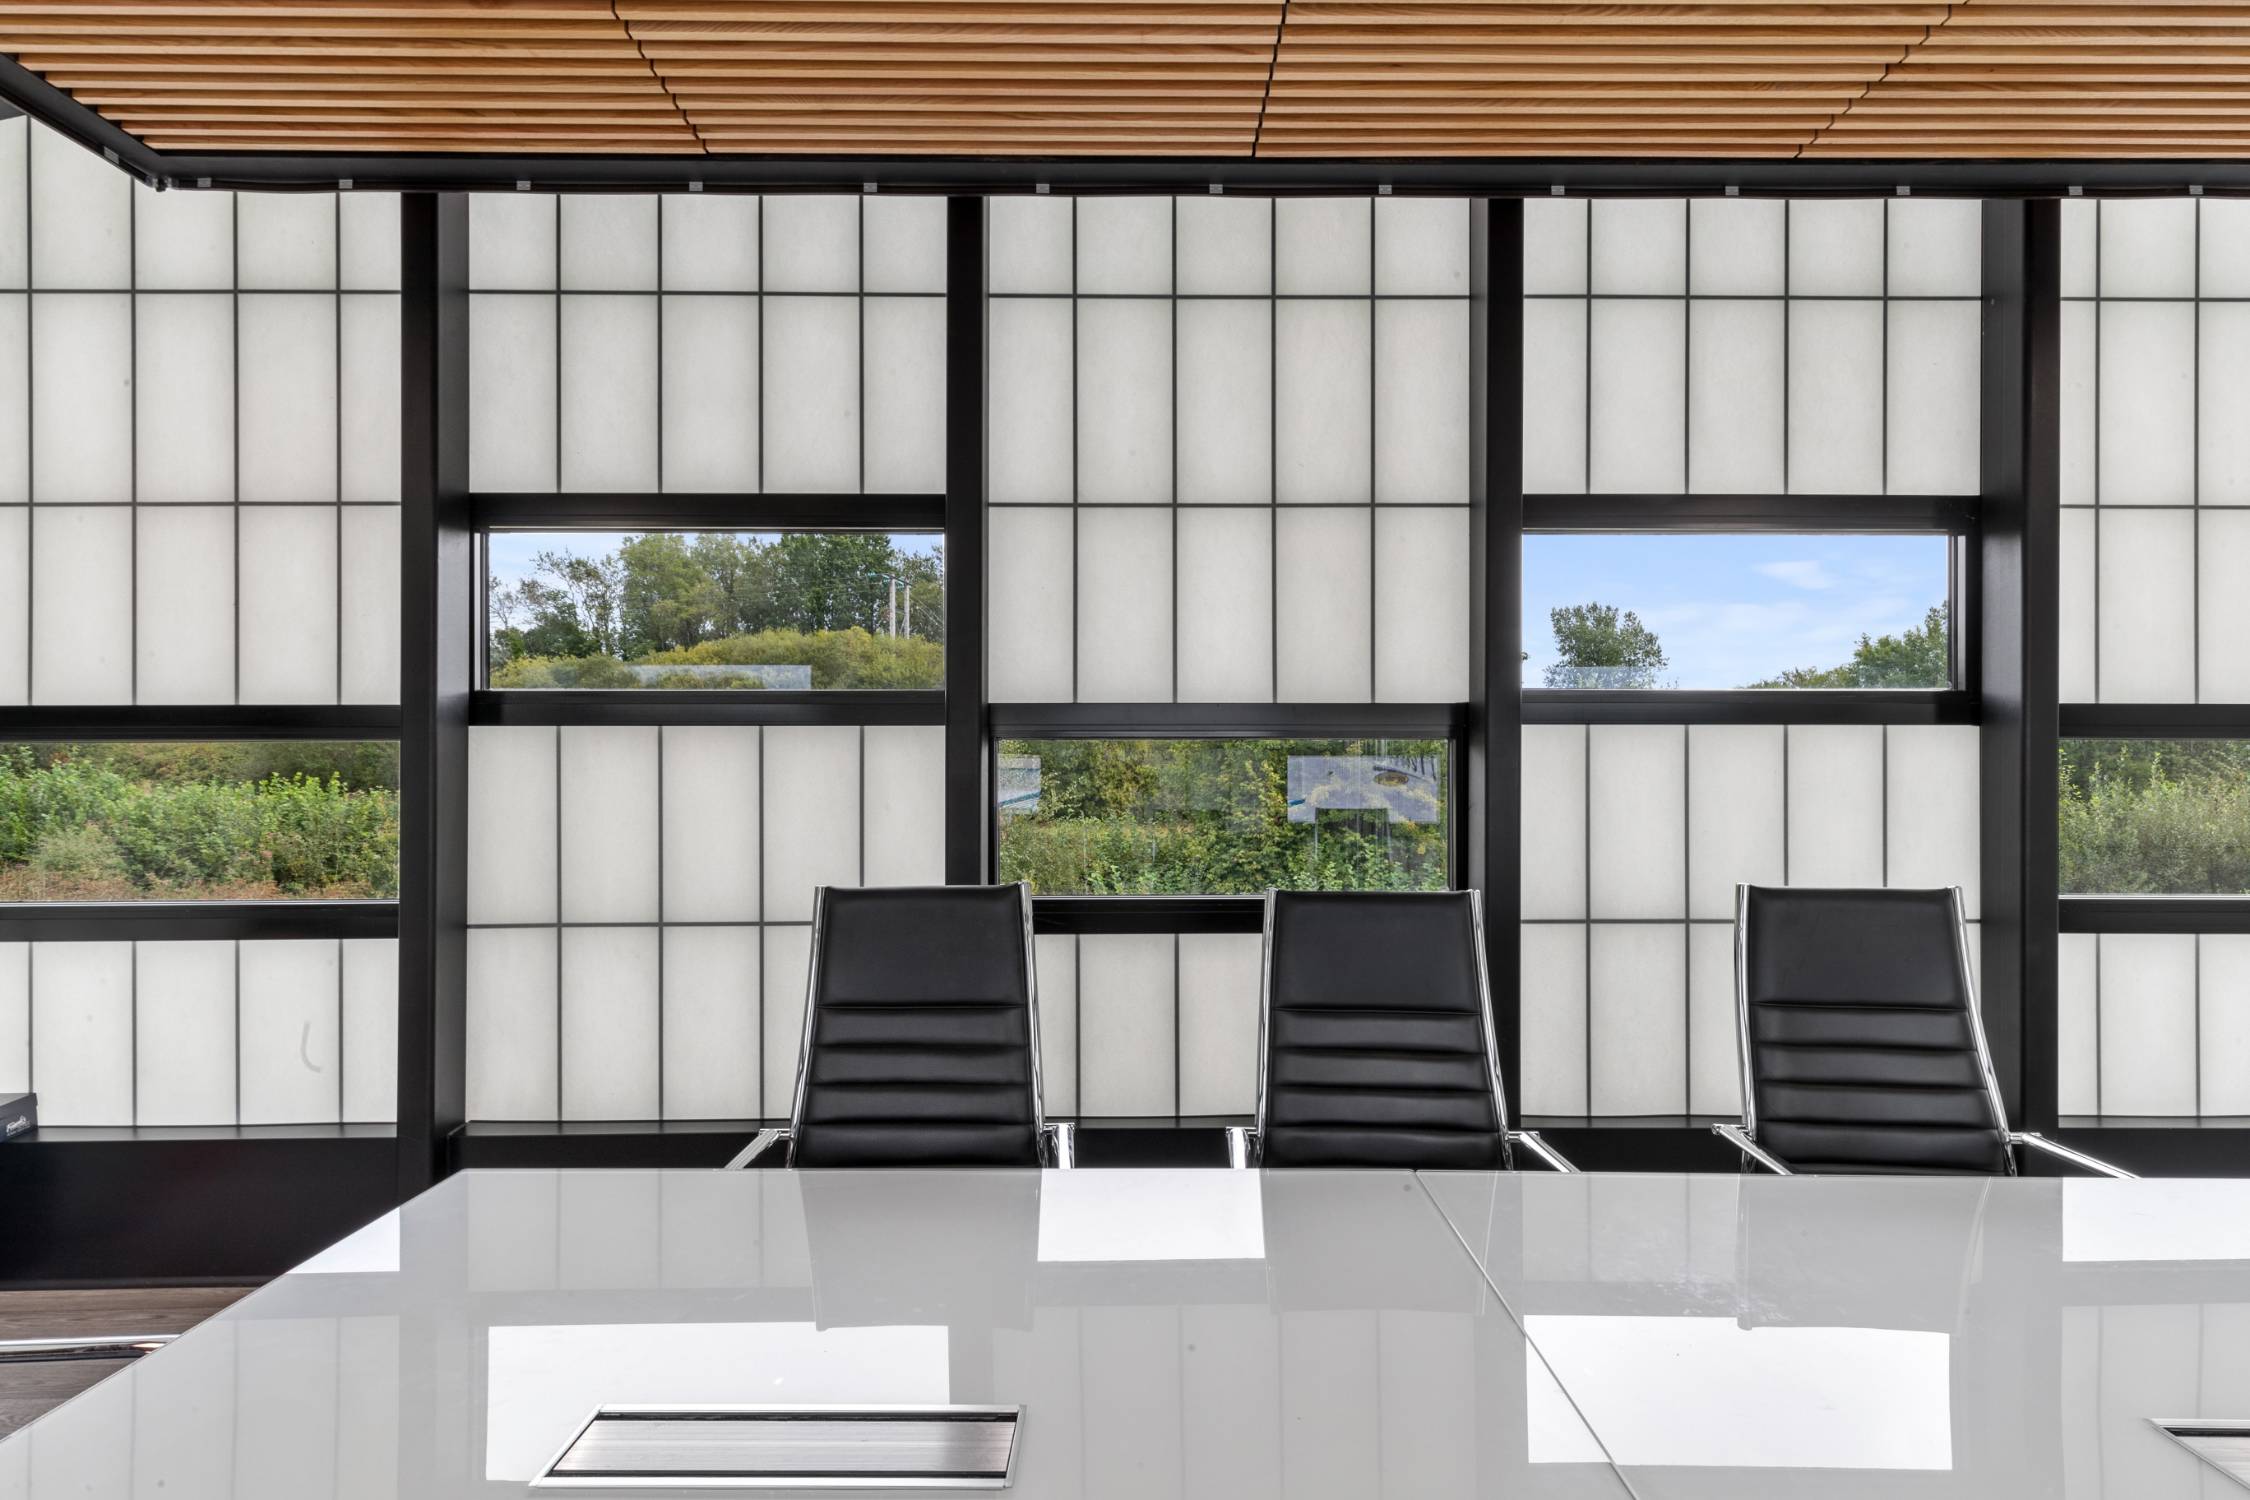 Kalwall Translucent Daylighting Panels into a stick curtain wall system (Raico Therm+)